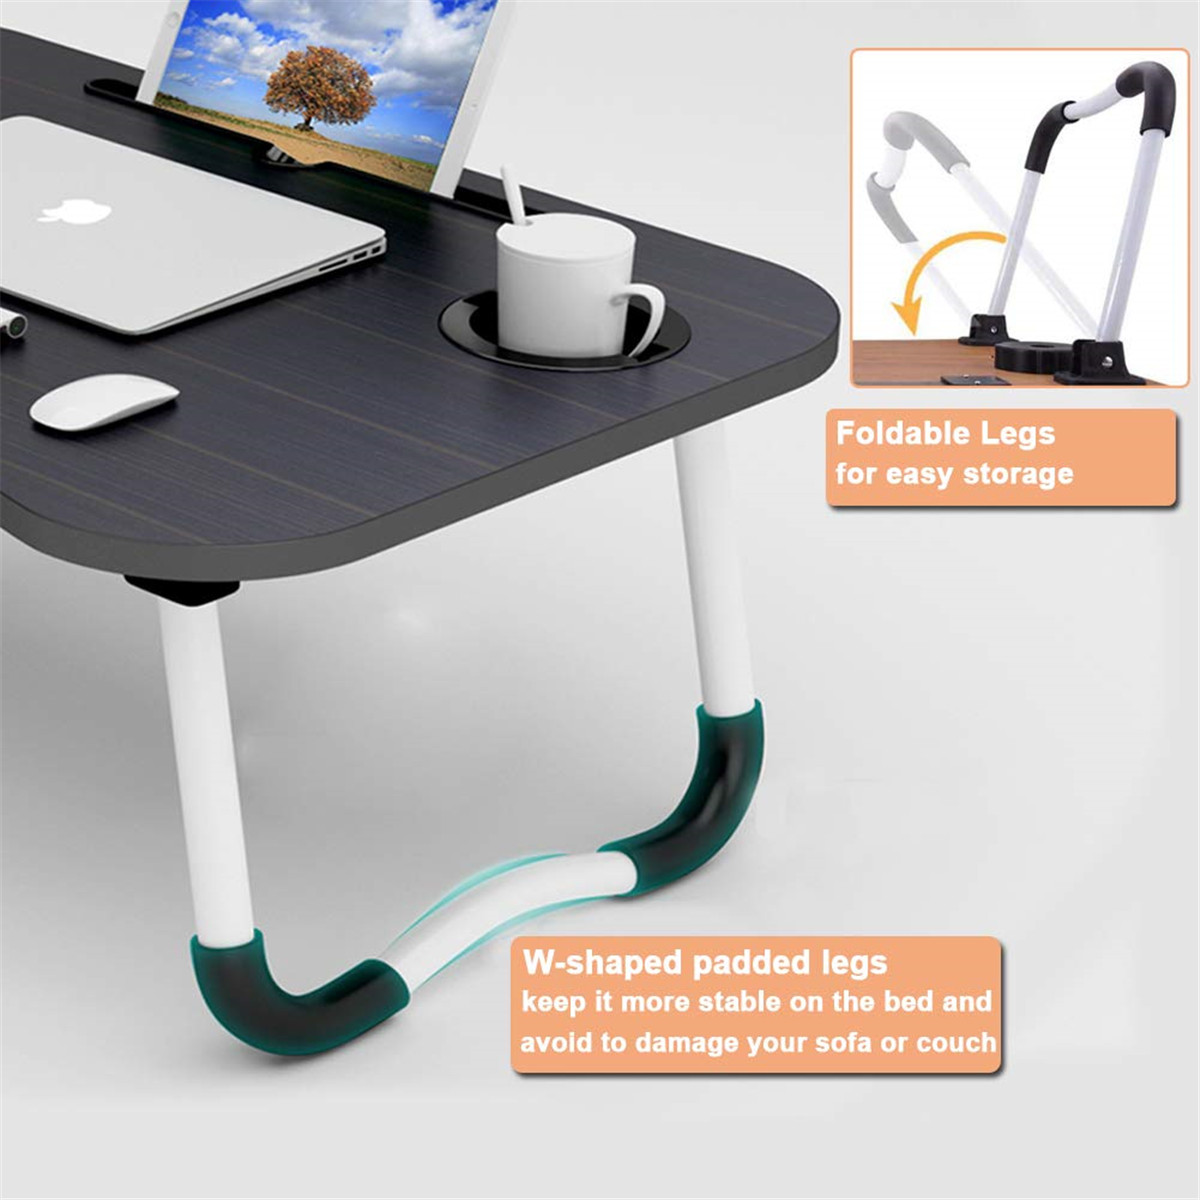 Multifunctional-Curved-Design-Folding-with-USB-Charging-Port-Pen-Cup-Slot-Home-Bed-Macbook-Phone-Sto-1872074-6